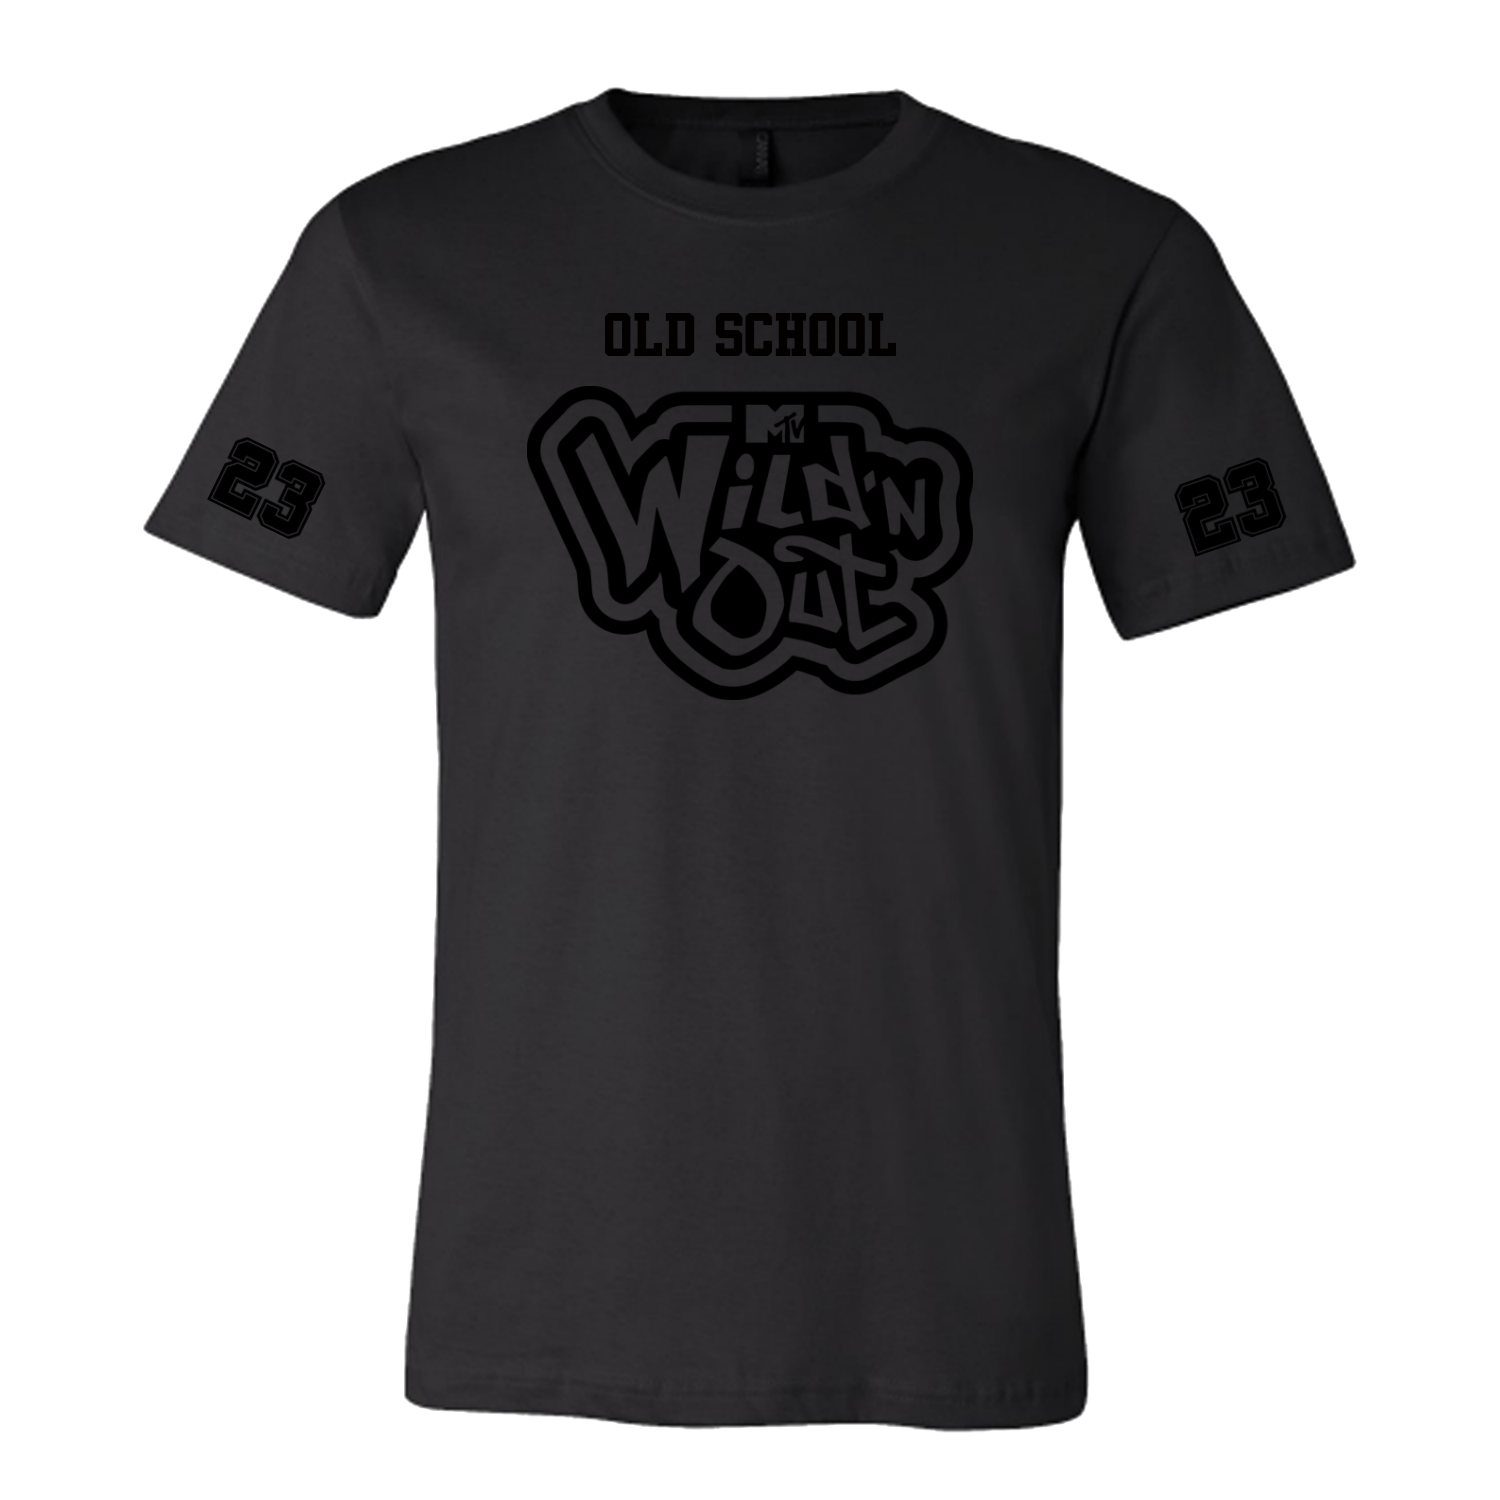 Wild 'N Out Black on Black Old School Short Sleeve T - Shirt - Paramount Shop